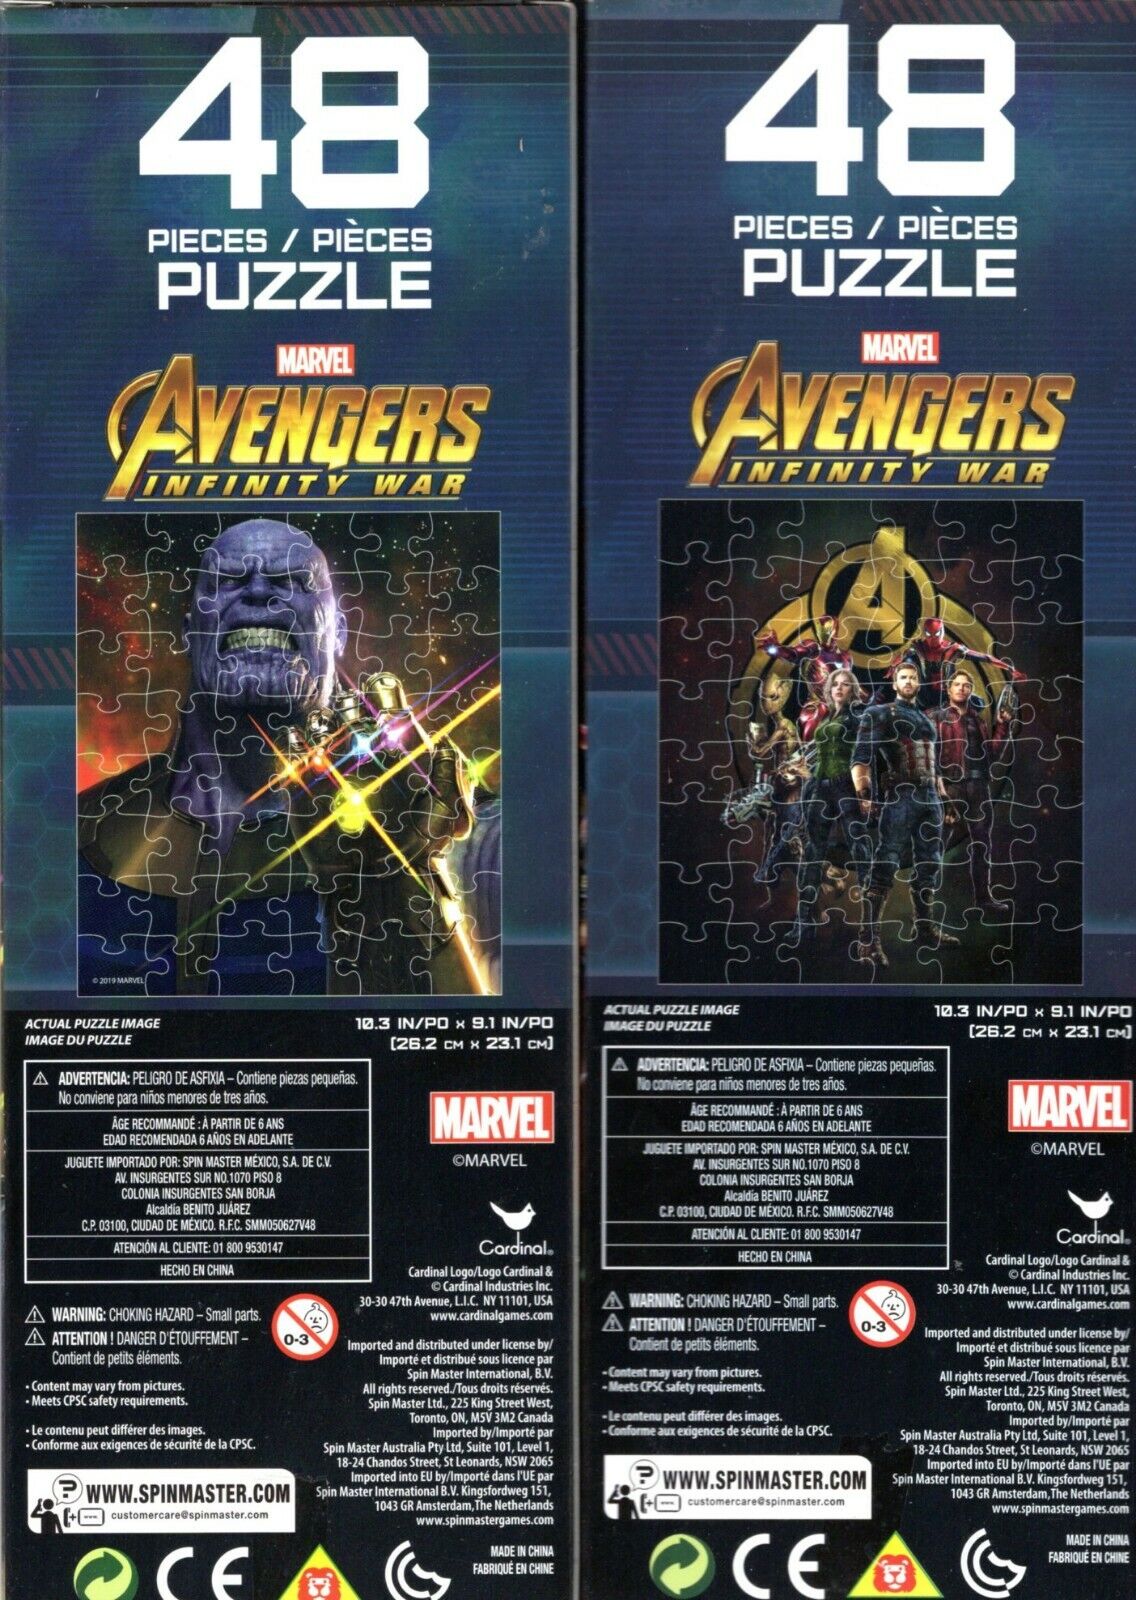 Marvel Avengers Infinity War - 48 Pieces Jigsaw Puzzle - v10 (set of 2)